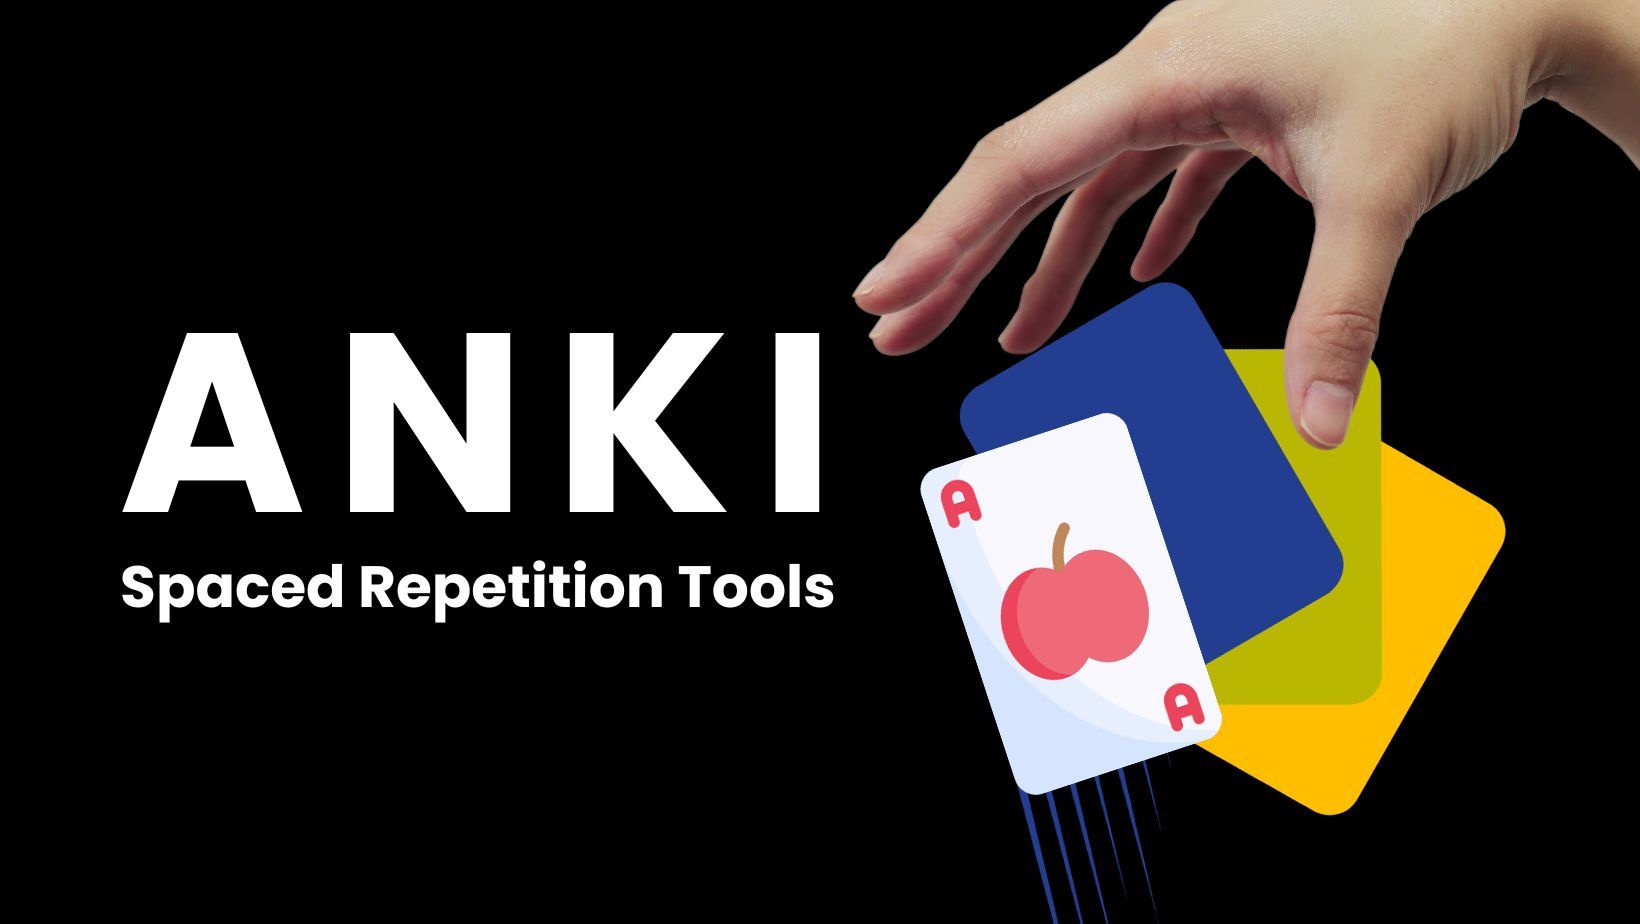 Anki: Spaced Repetition Tools